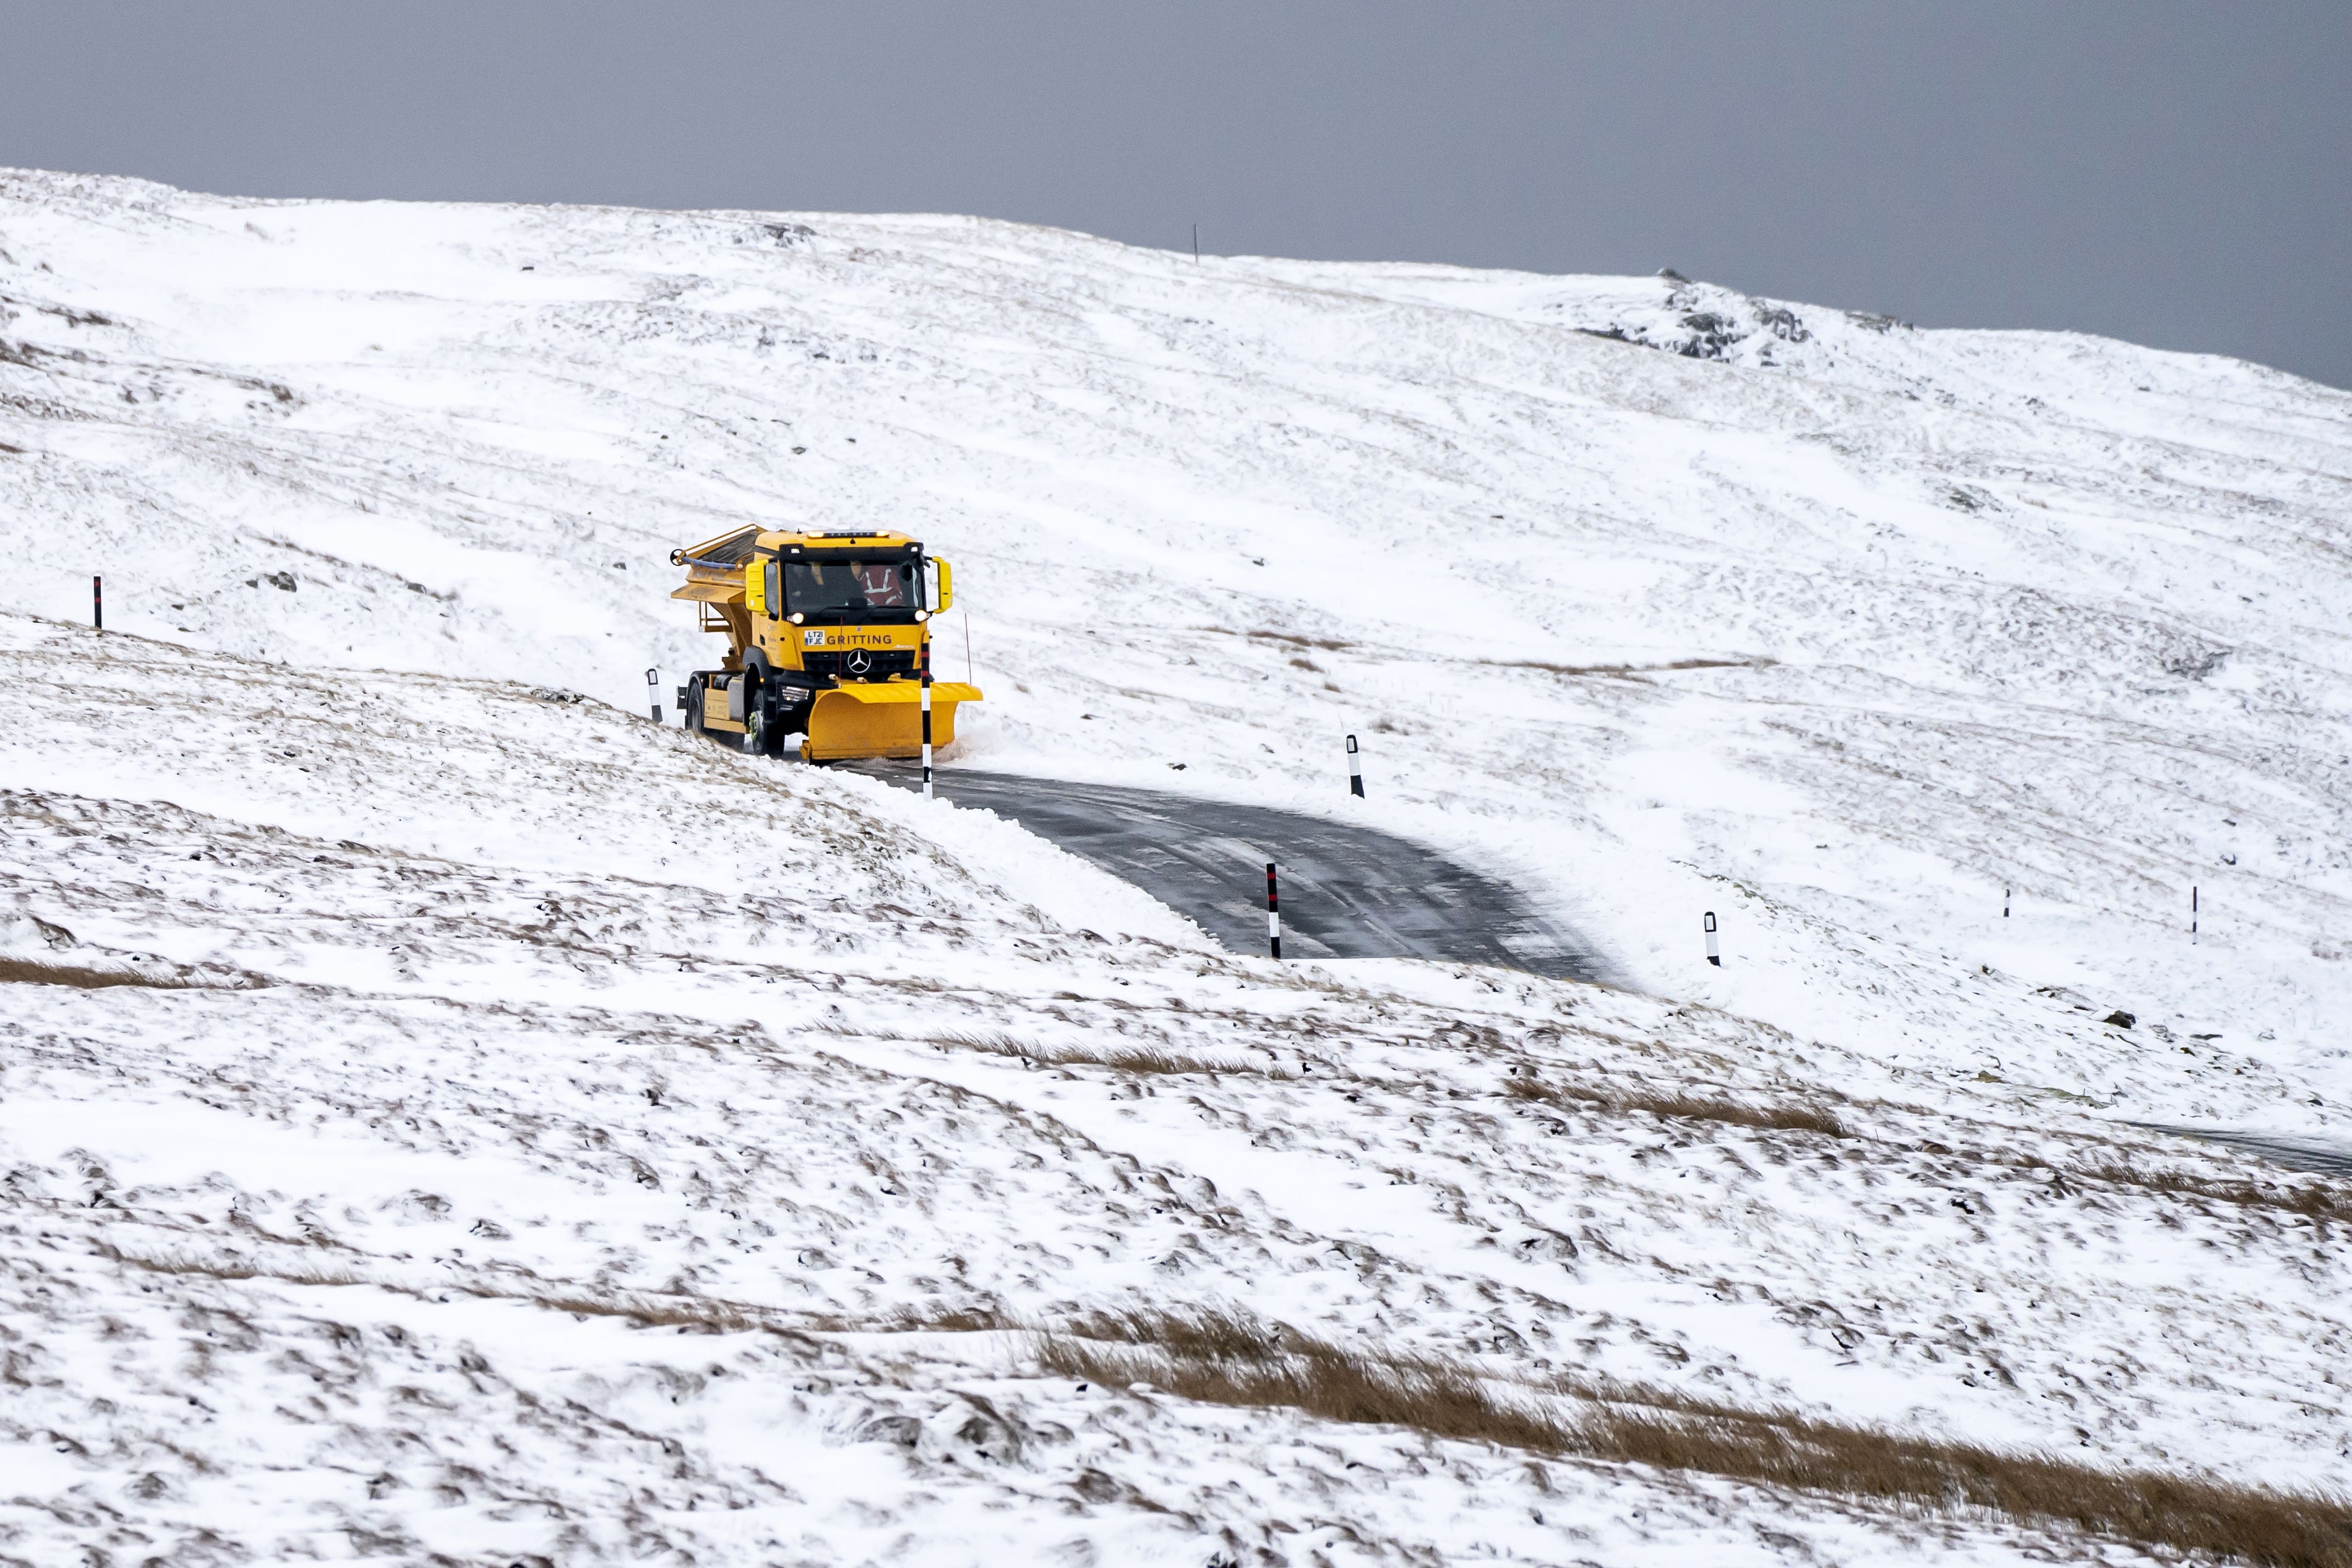 The UK has been hit by wintry conditions (Danny Lawson/PA)